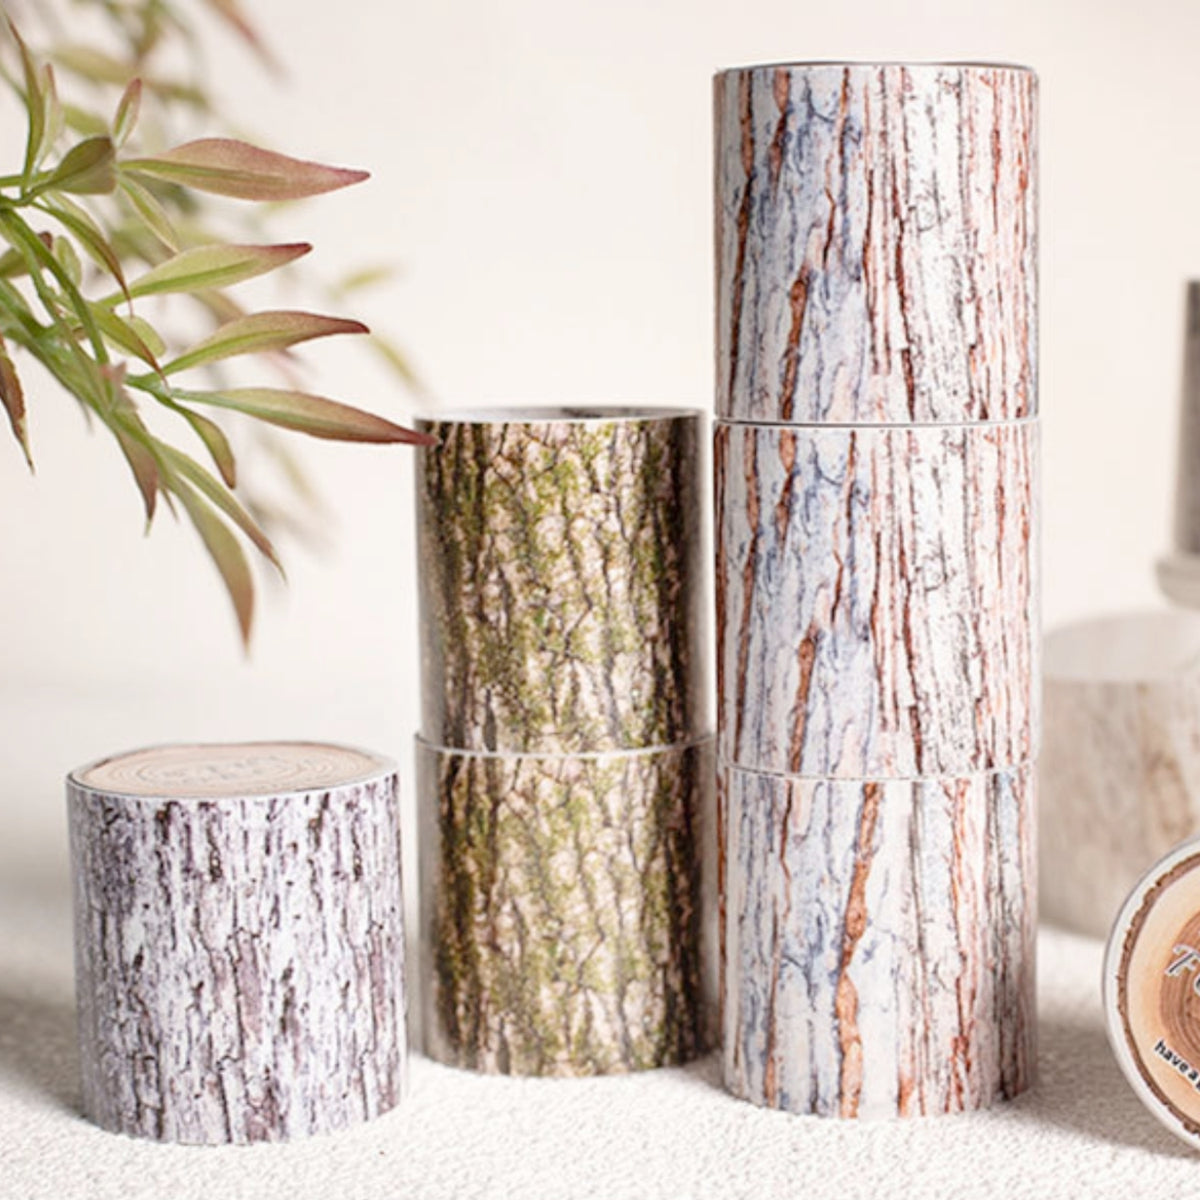 Tree Pattern Washi Tape Product Details ◎Material ABS Plastic ◎Color：Cream ◎Size： 205mm  8.2 120mm  4.8 (1)